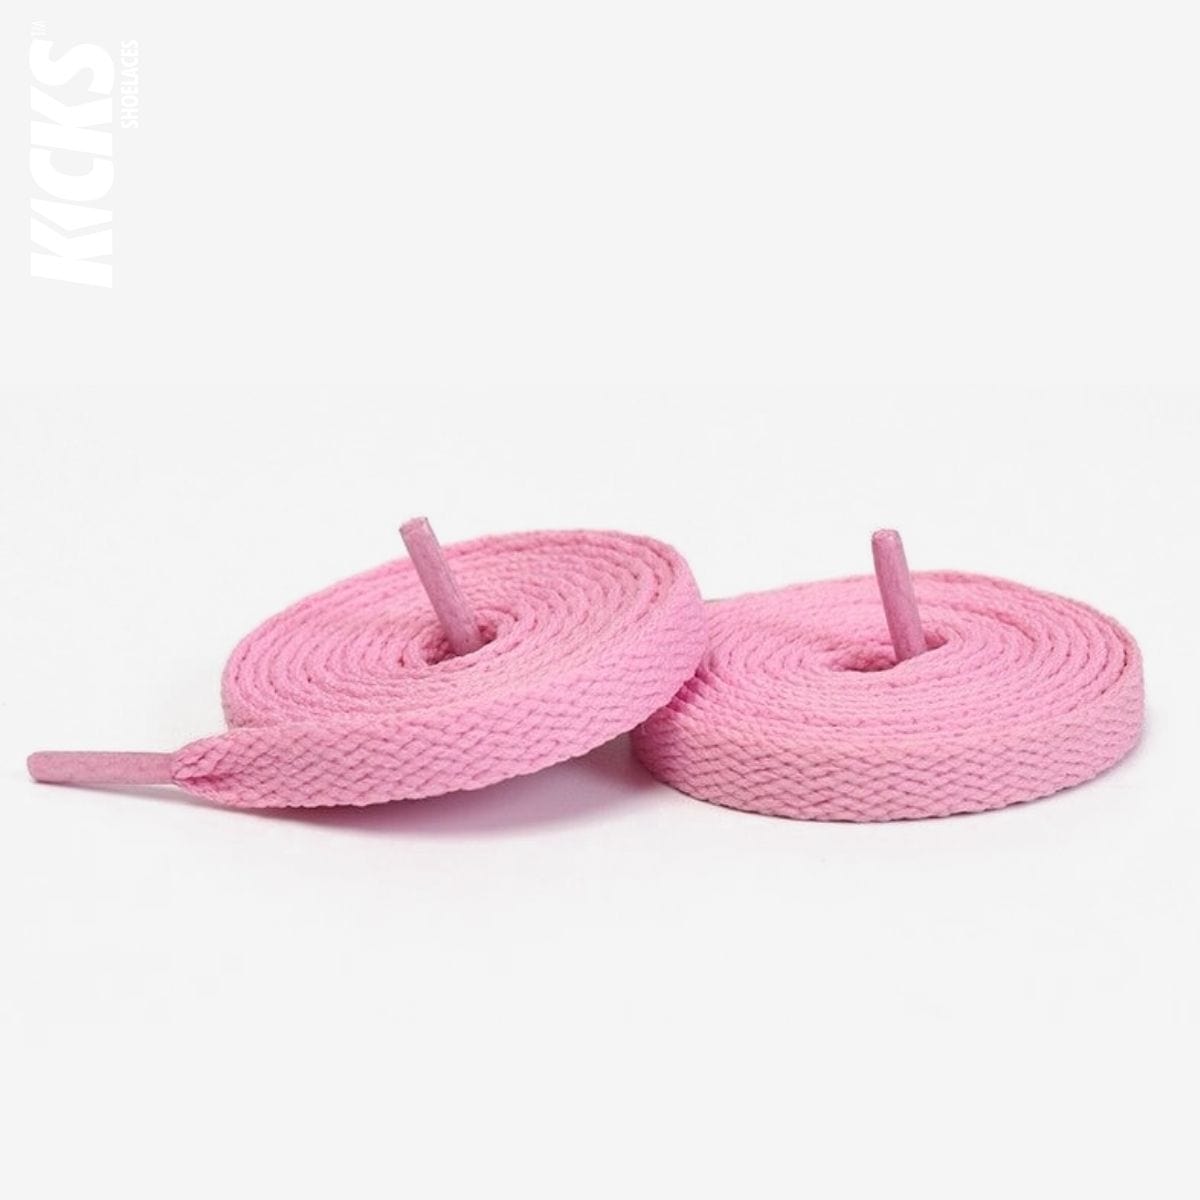 Pink Replacement Converse Laces for Converse One Star Sneakers by Kicks Shoelaces